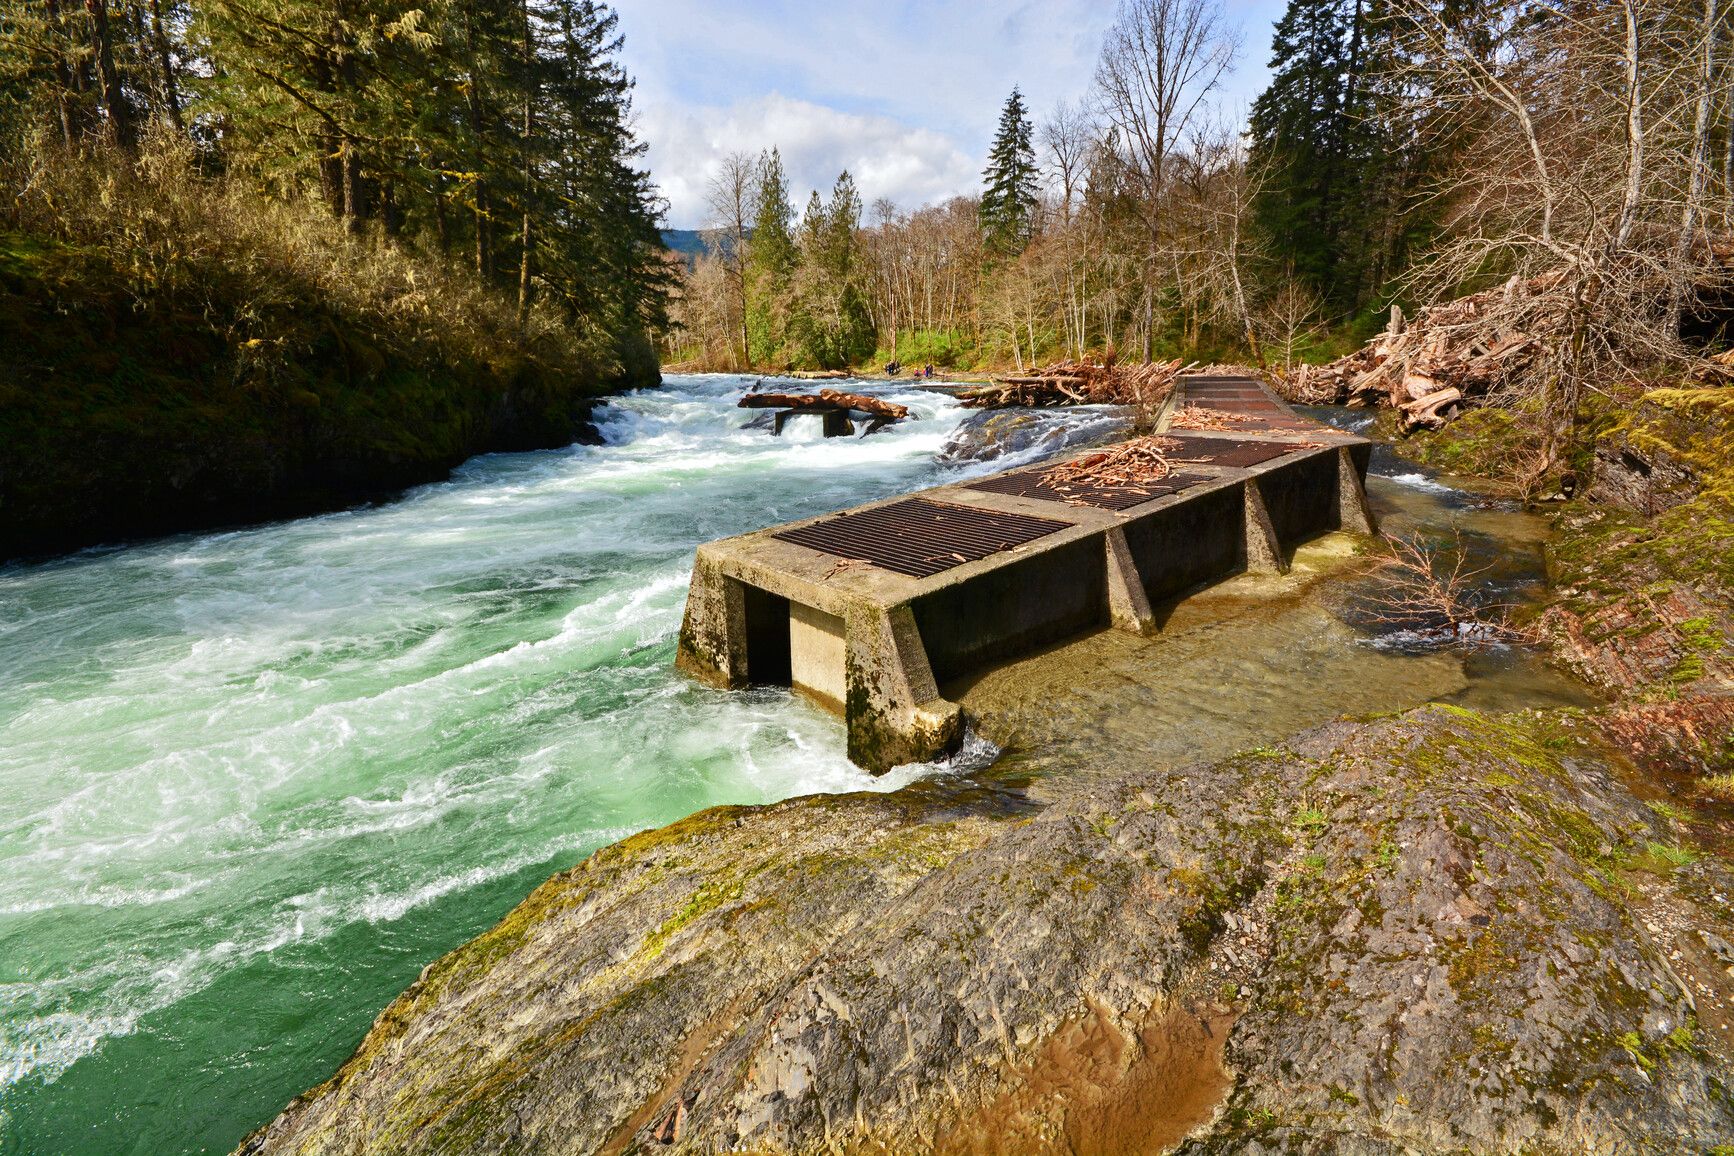 Fish ladder on the river. Cowichan River Park.